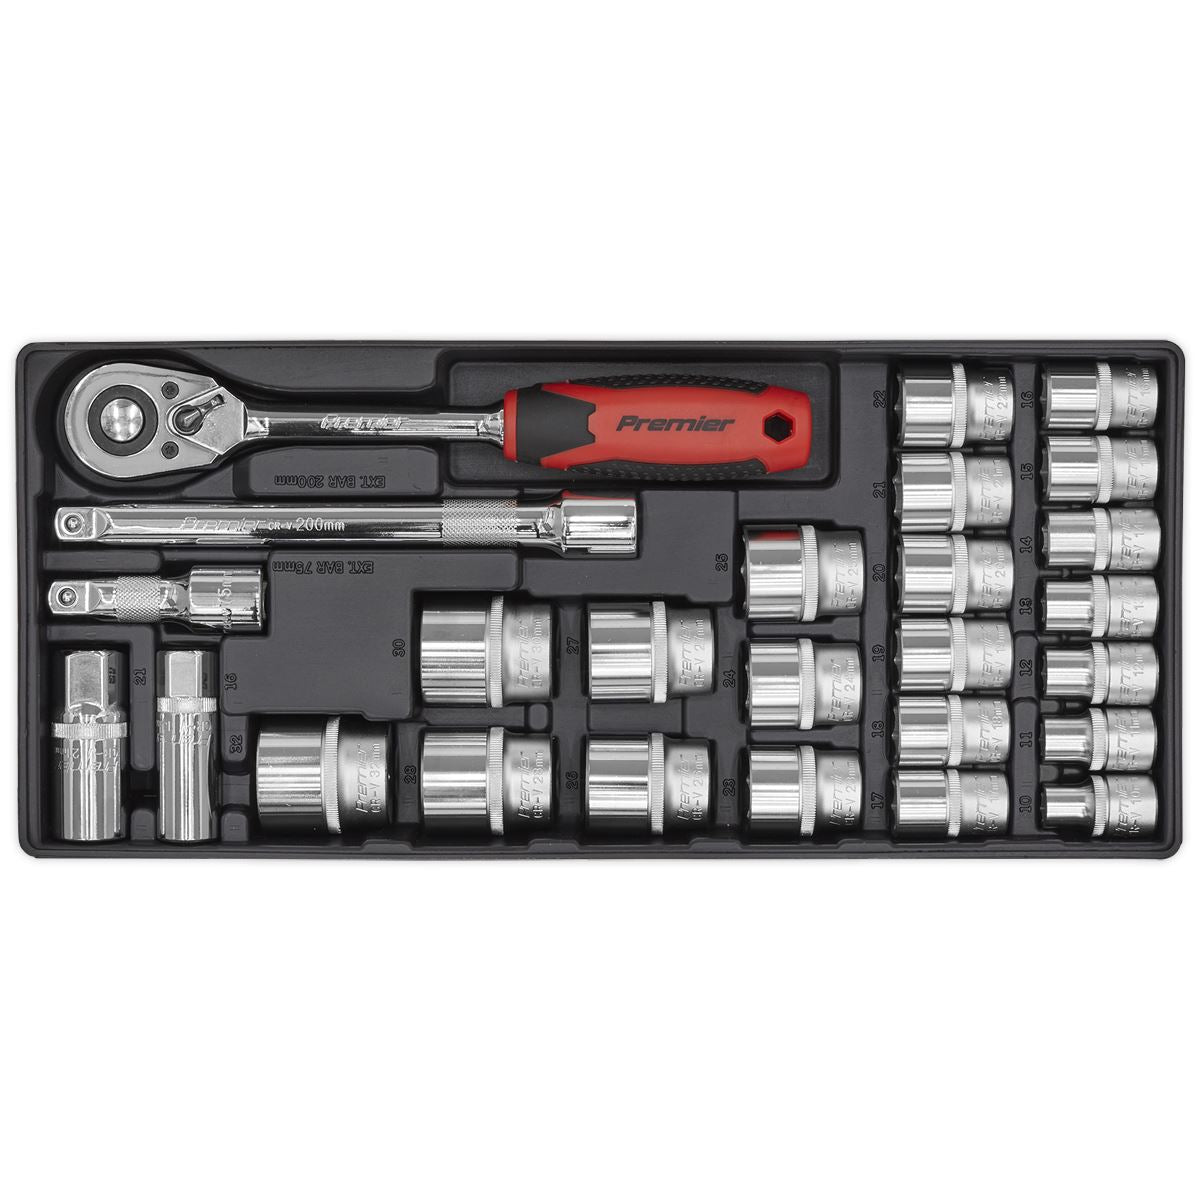 Sealey Premier Tool Tray with Socket Set 26pc 1/2"Sq Drive